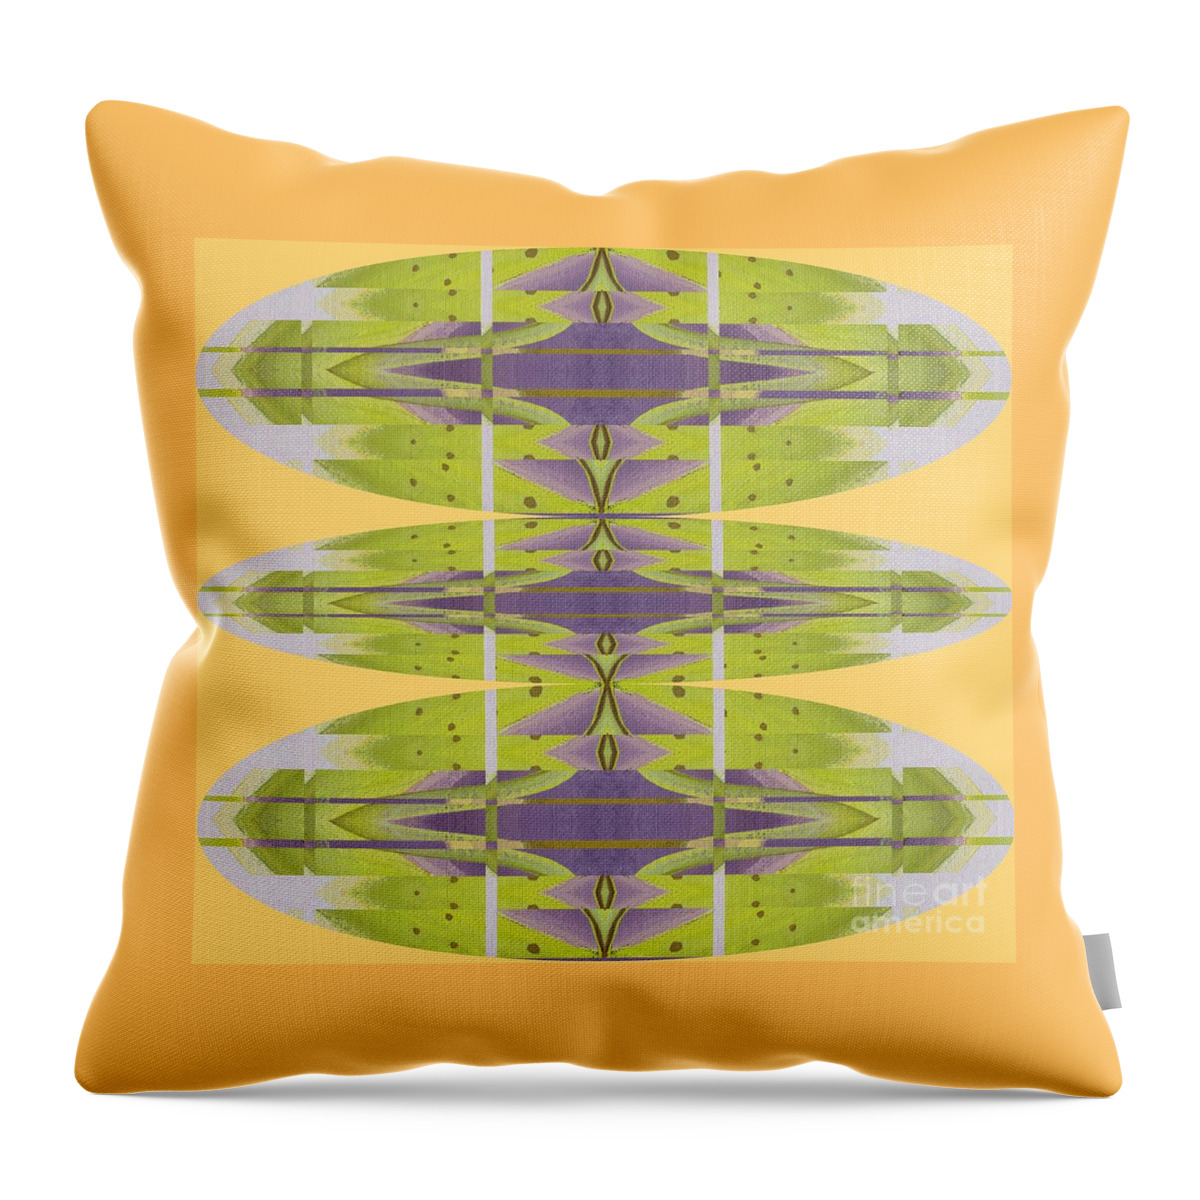 Untitled 10 Inverted Variation By Helena Tiainen Throw Pillow featuring the painting Untitled 10 Inverted Variation by Helena Tiainen